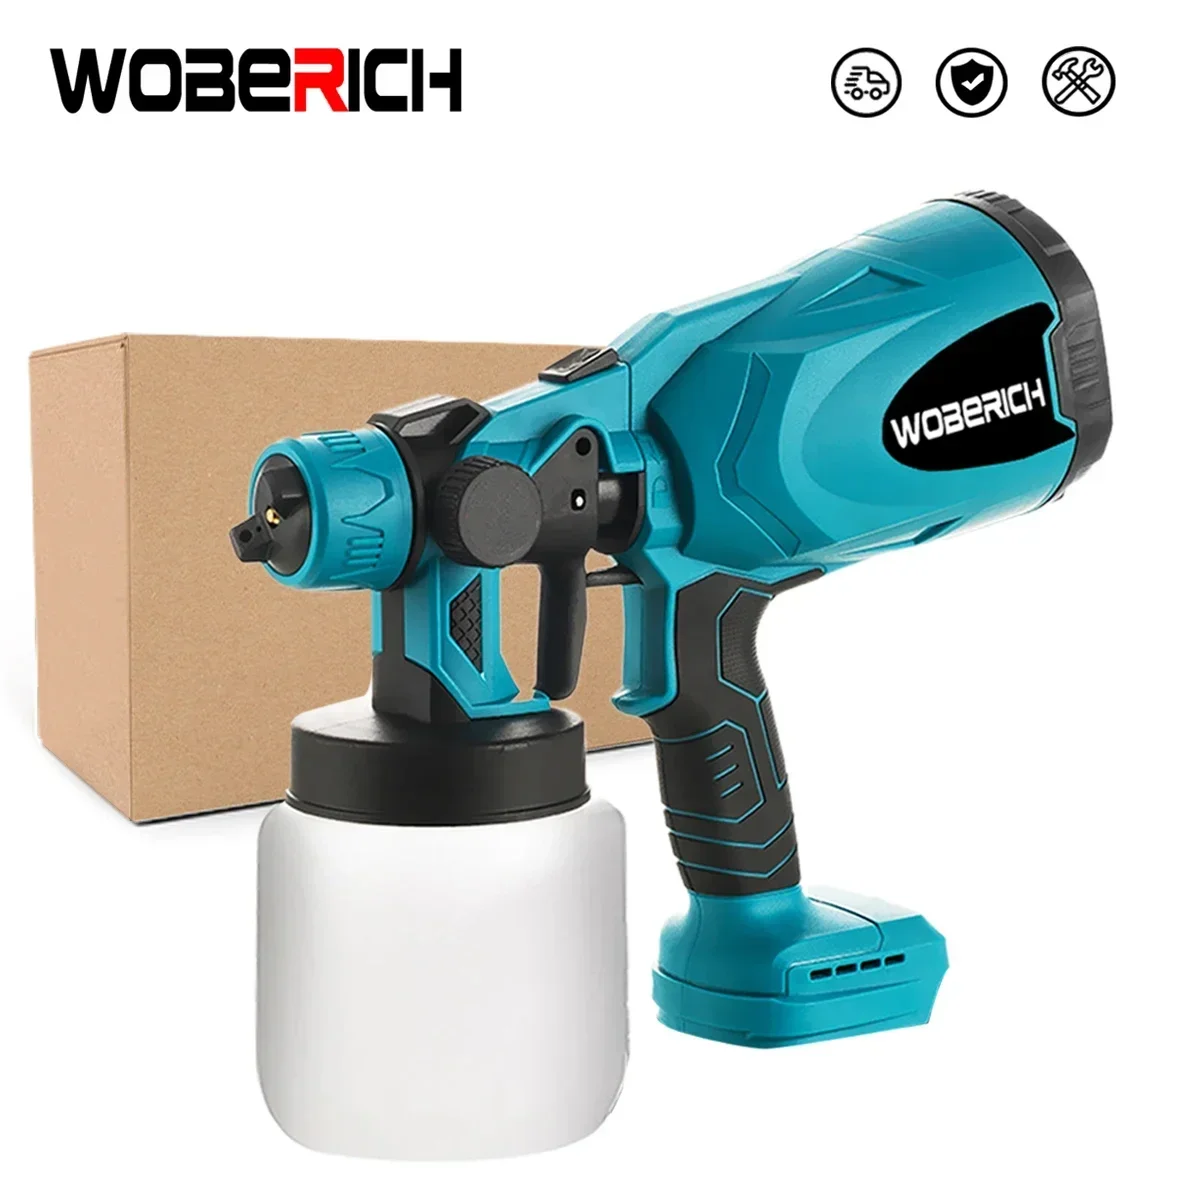 Electric Cordless Paint Sprayer Gun for Wood Fence Furniture Cabinets Walls Fit Makita 18v Battery without Battery picket fence hazel wood 60x500 cm